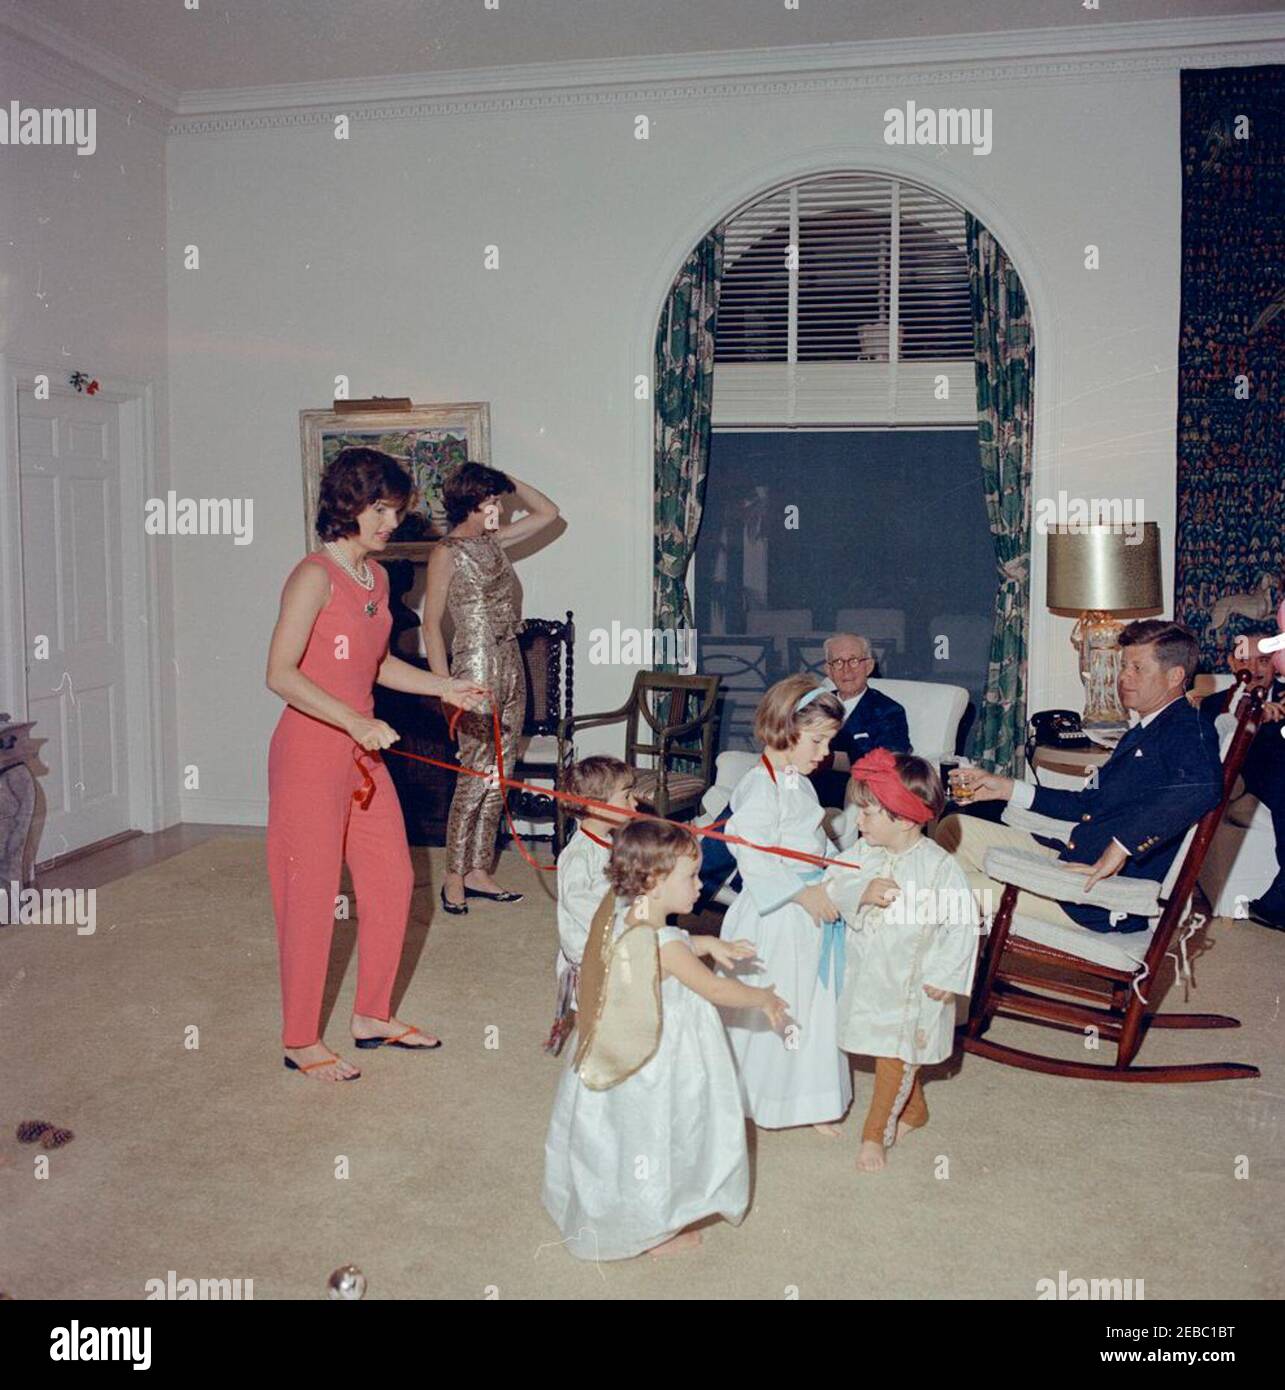 Christmas Day, Palm Beach. President John F. Kennedy celebrates Christmas with his family at the residence of C. Michael Paul in Palm Beach, Florida. Left to right: First Lady Jacqueline Kennedy (holding red ribbons); Eunice Kennedy Shriver; John F. Kennedy, Jr.; Anna Christina Radziwill (in foreground); Caroline Kennedy; Joseph P. Kennedy, Sr. (seated in armchair); Anthony Radziwill; President Kennedy (seated in rocking chair); Prince Stanislaus Radziwill of Poland (at edge of frame). [Notes: Blemishes throughout image are original to the negative.] Stock Photo